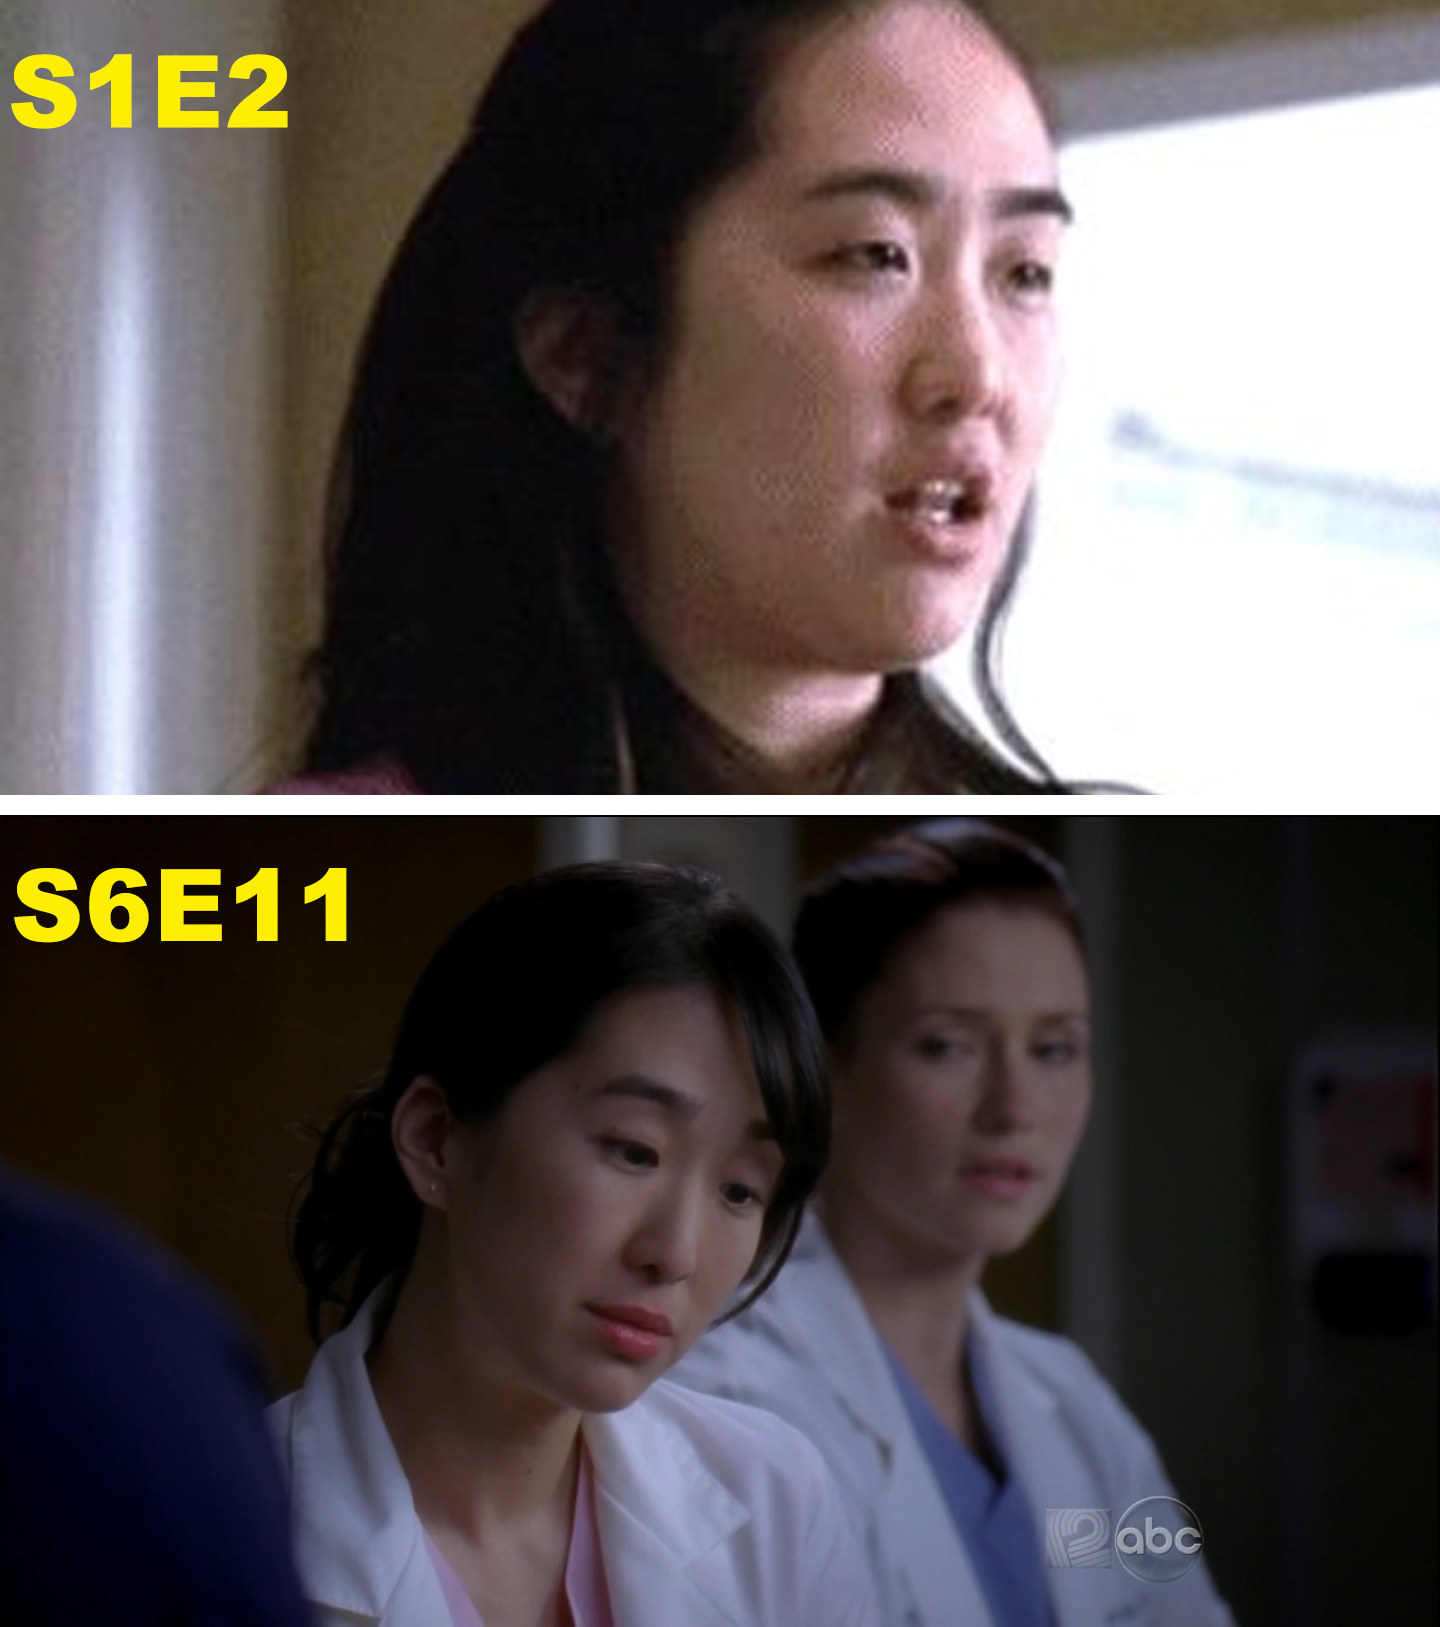 Two stills from Grey&#x27;s Anatomy showing the same actress, one labeled S1E2 and the other labeled S6E11